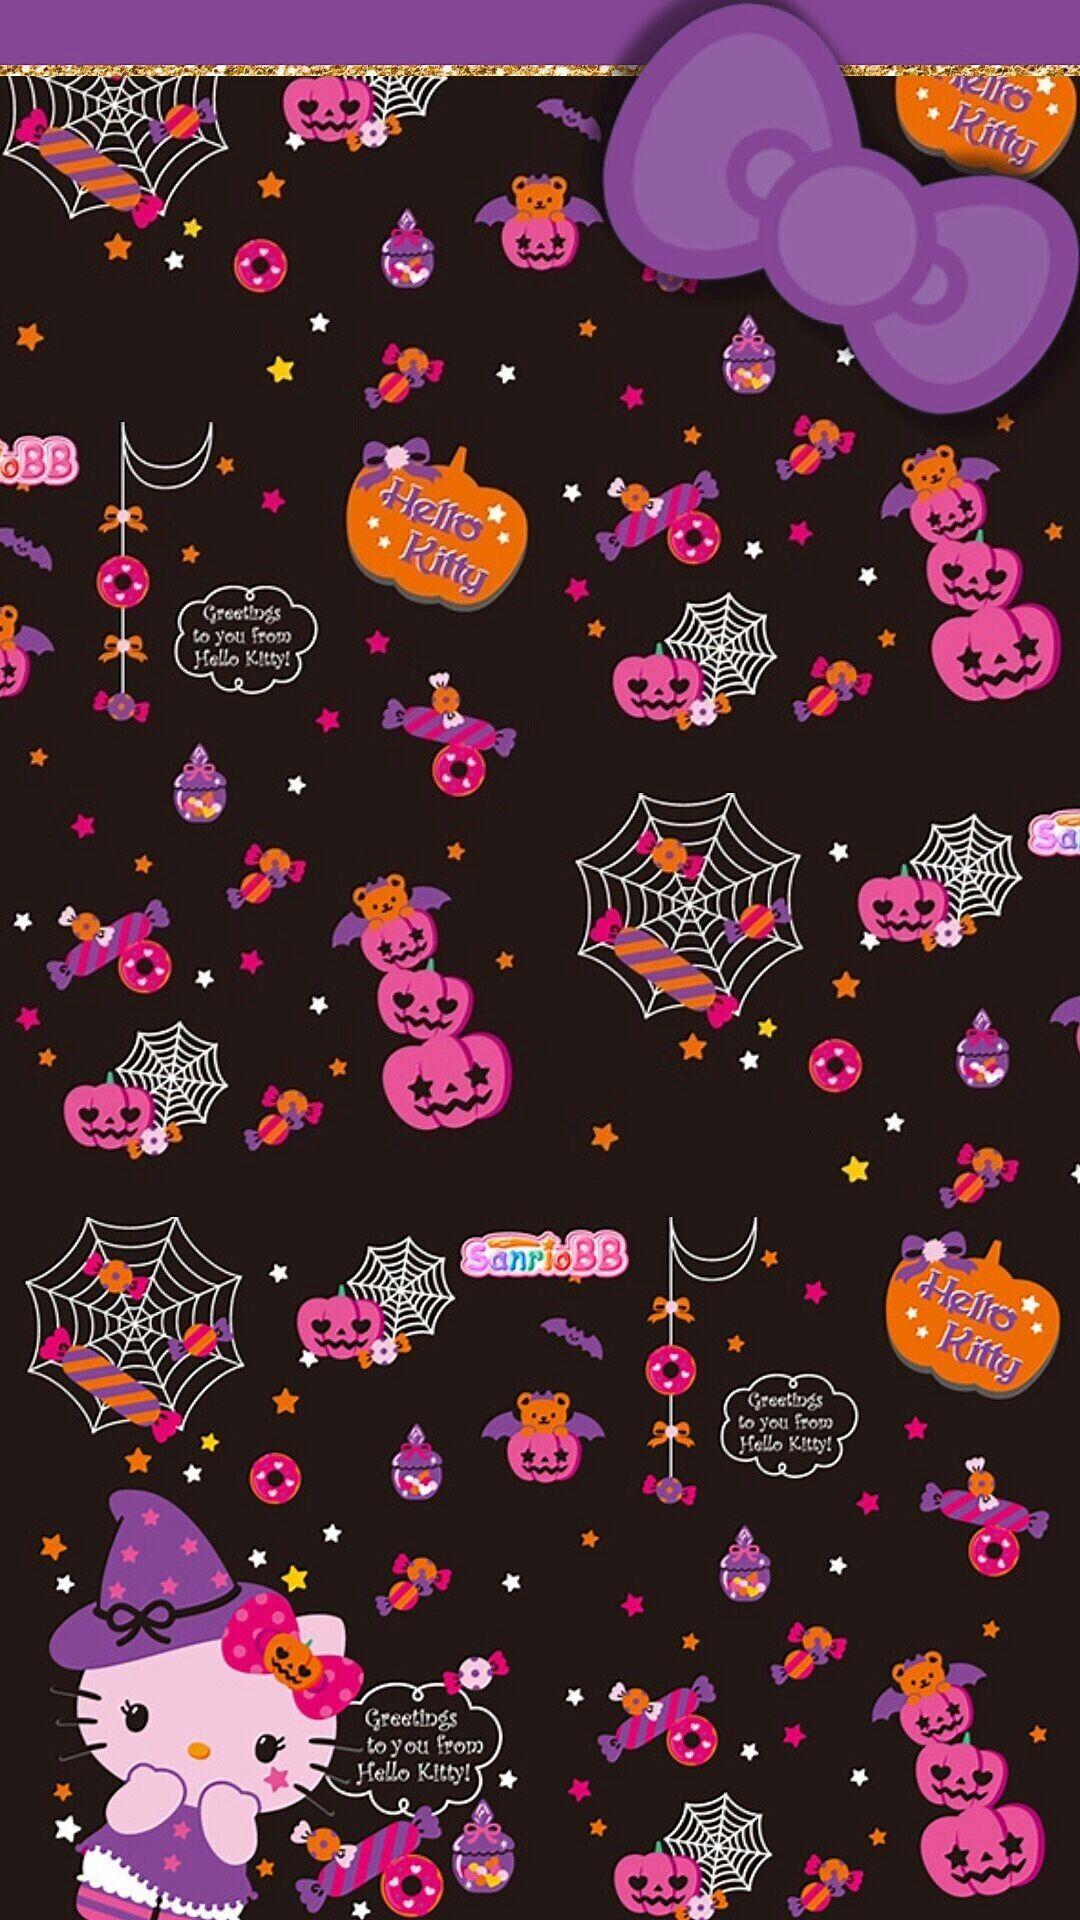 Hello Kitty the link now to see all of our cool cat collecti. Hello kitty halloween wallpaper, Hello kitty halloween, Halloween wallpaper iphone